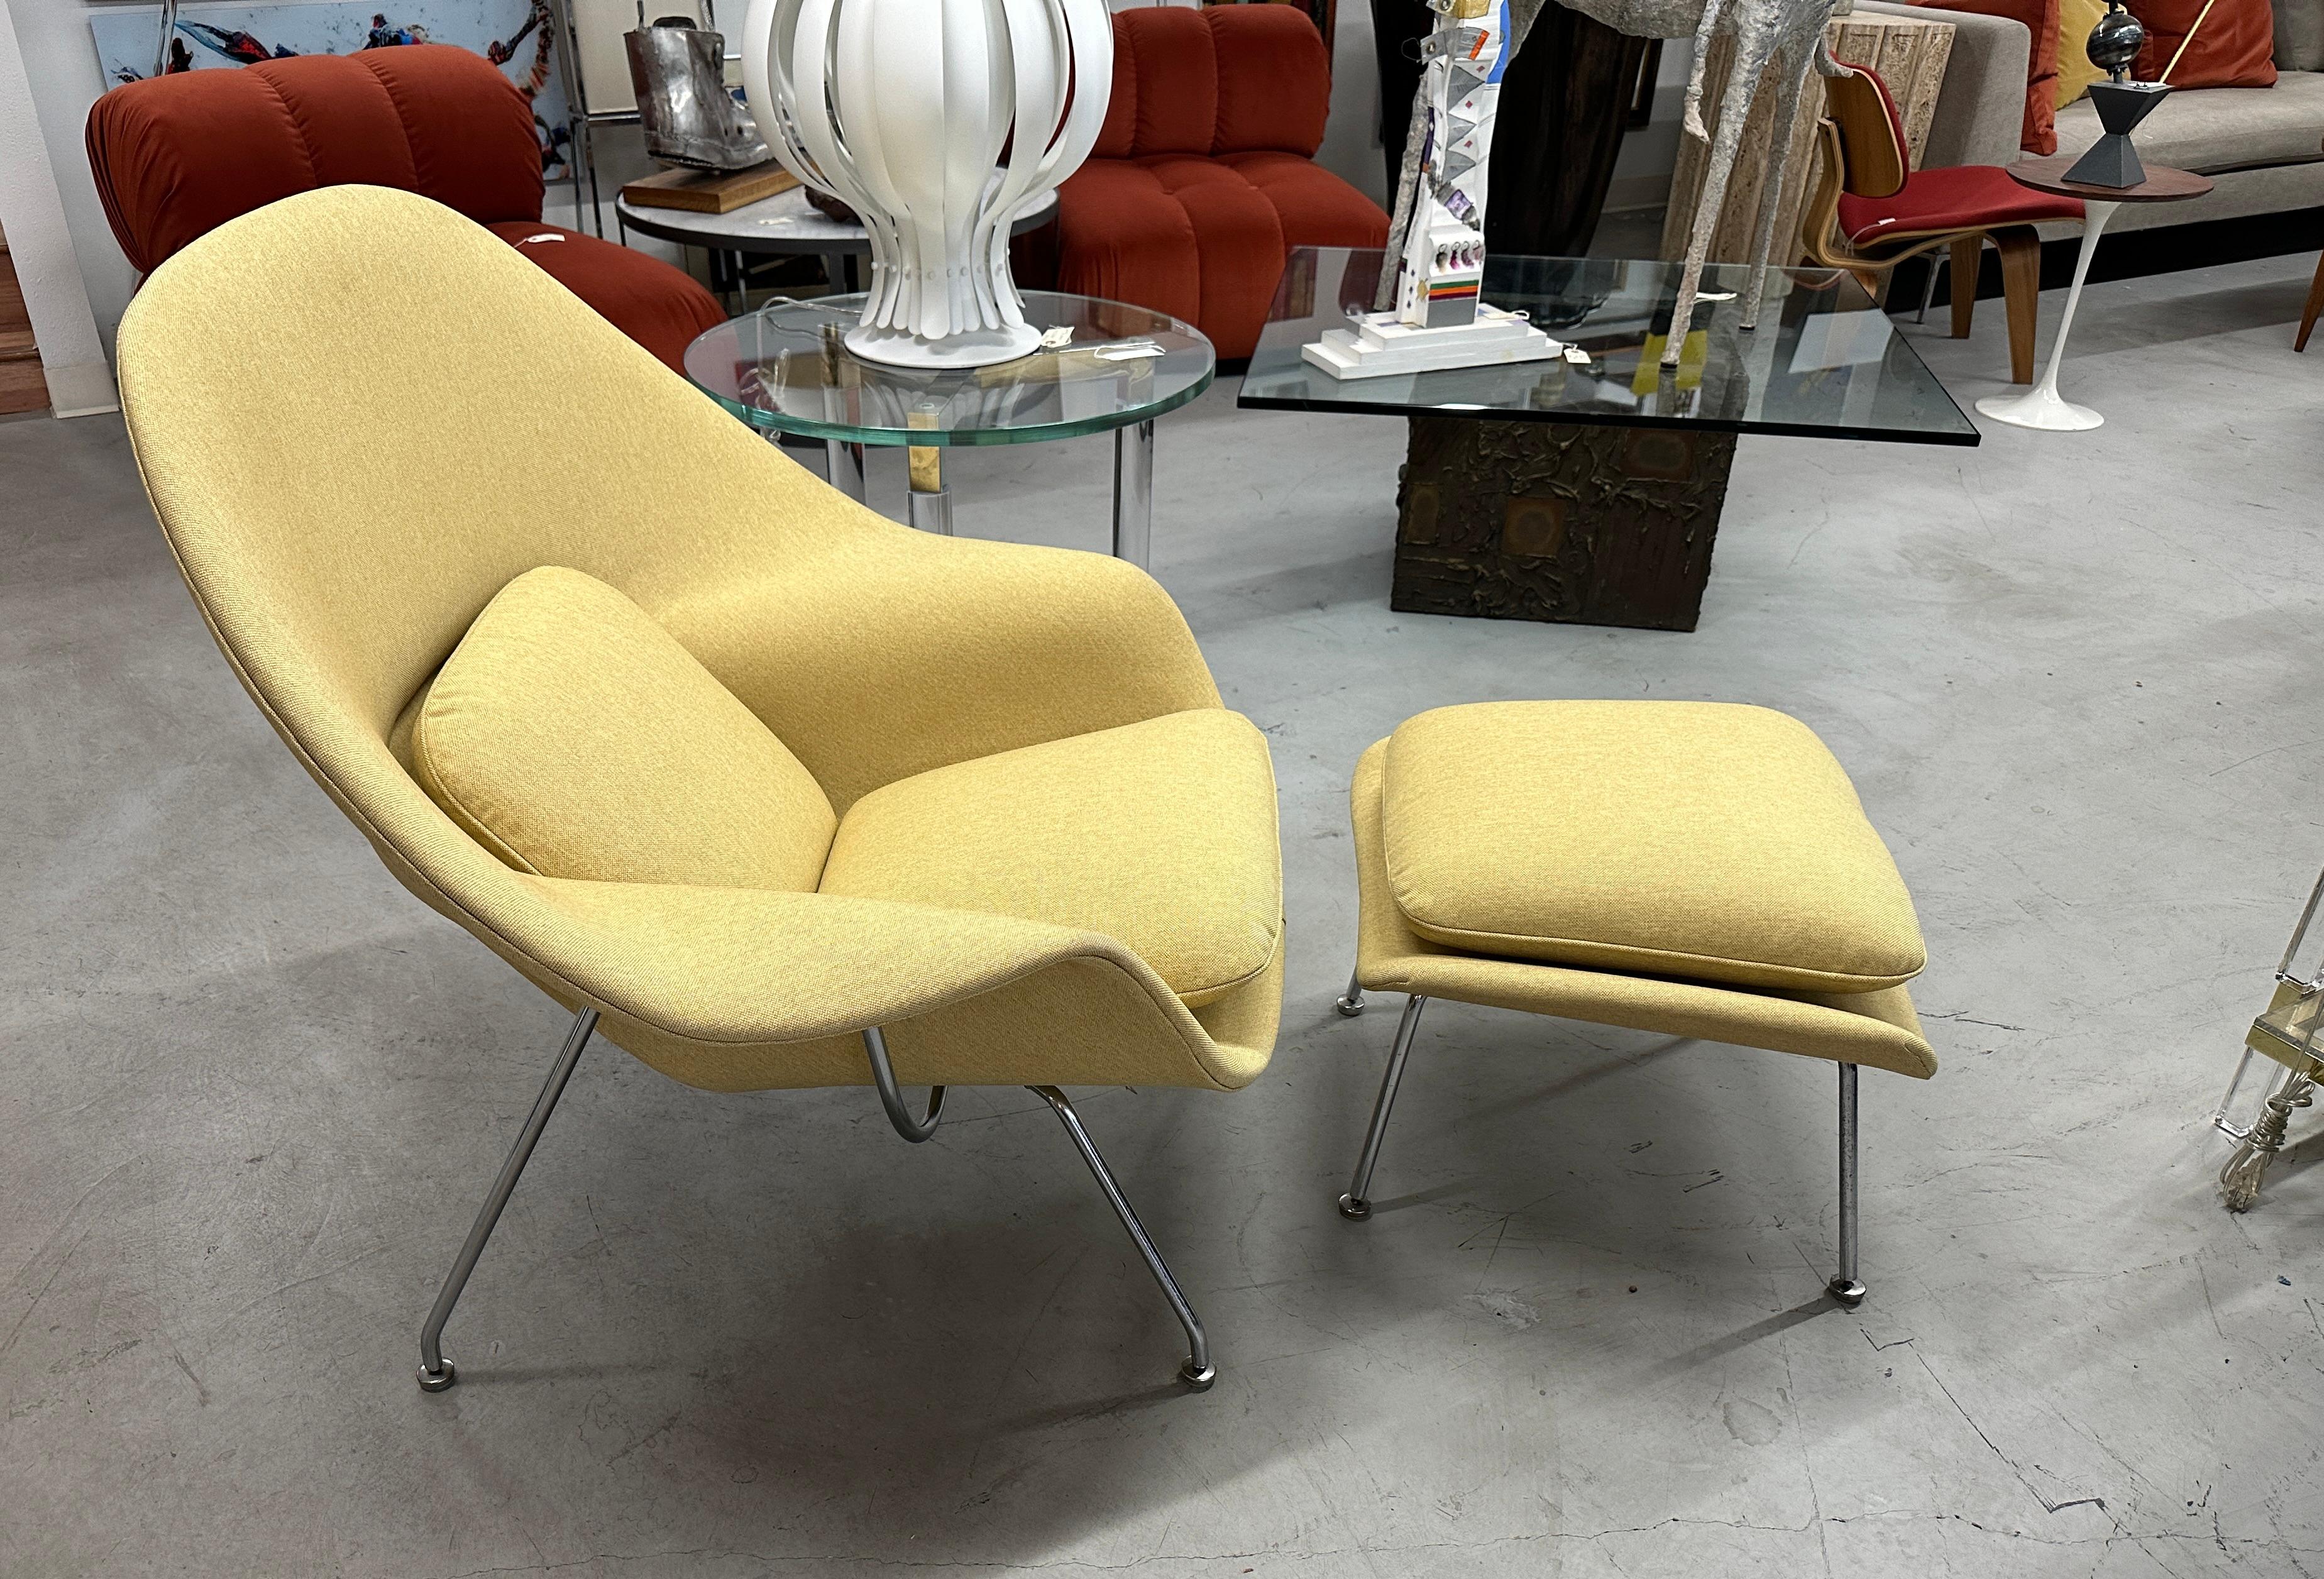 A lovely example of the Iconic Womb Chair and Ottoman designed by Eero Saarinen for Knoll. We have had it re-upholstered in a genuine Knoll fabric, Crossroads in a Honey Bee color. The fabric content is 43% Polyester, 37% Post Industrial Recycled